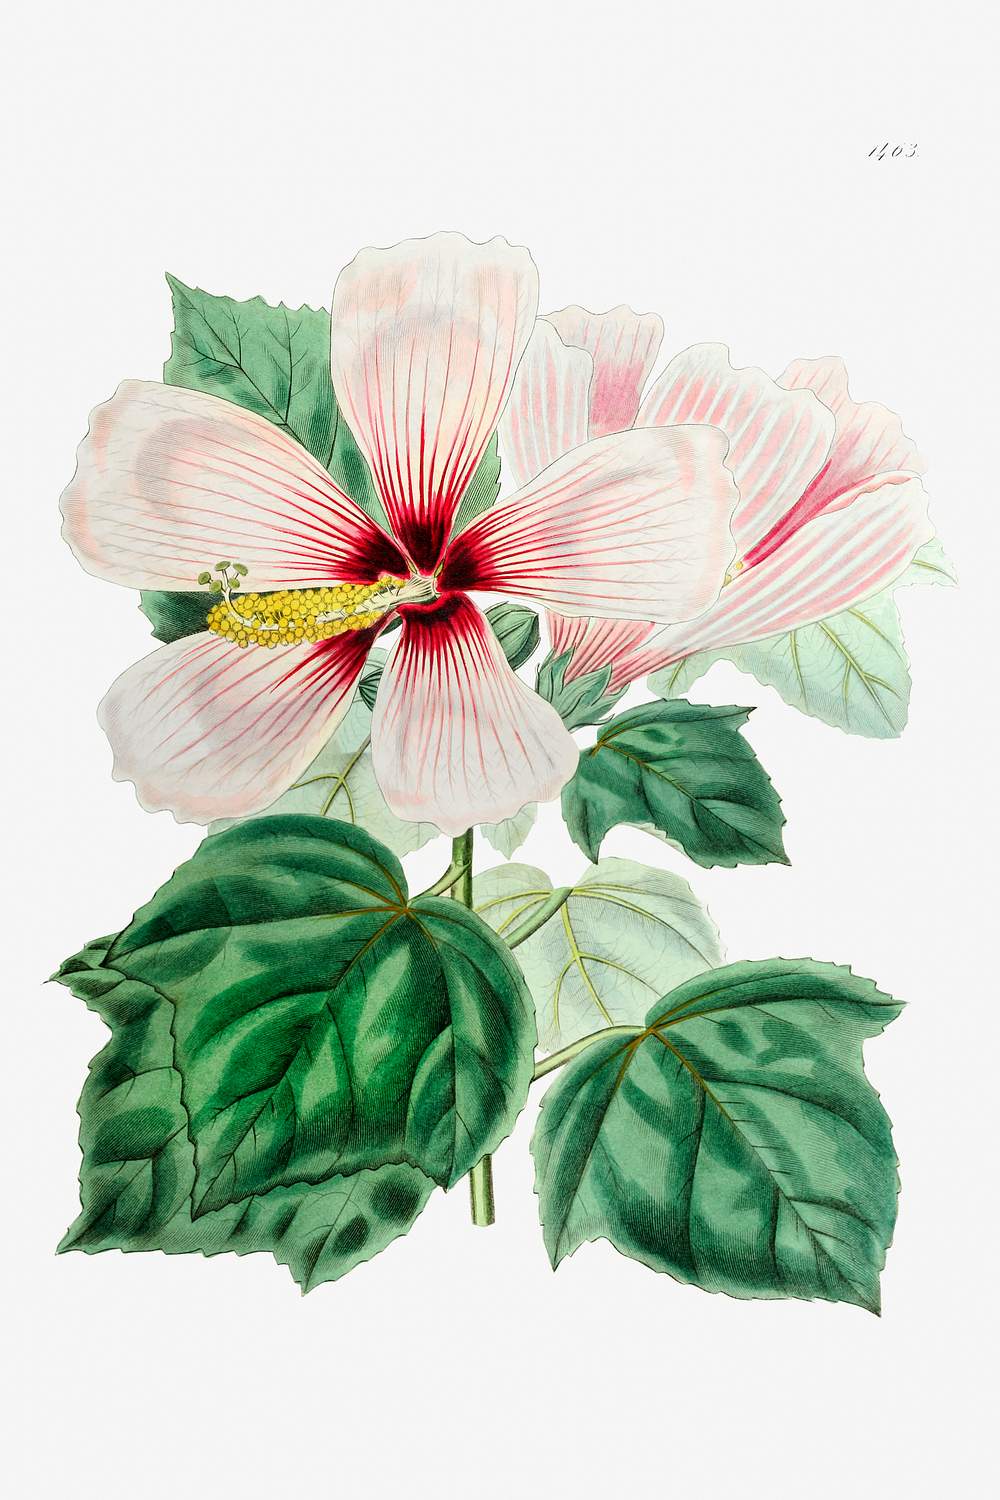 Hibiscus Images | Free HD Backgrounds, PNGs, Vector Graphics ...